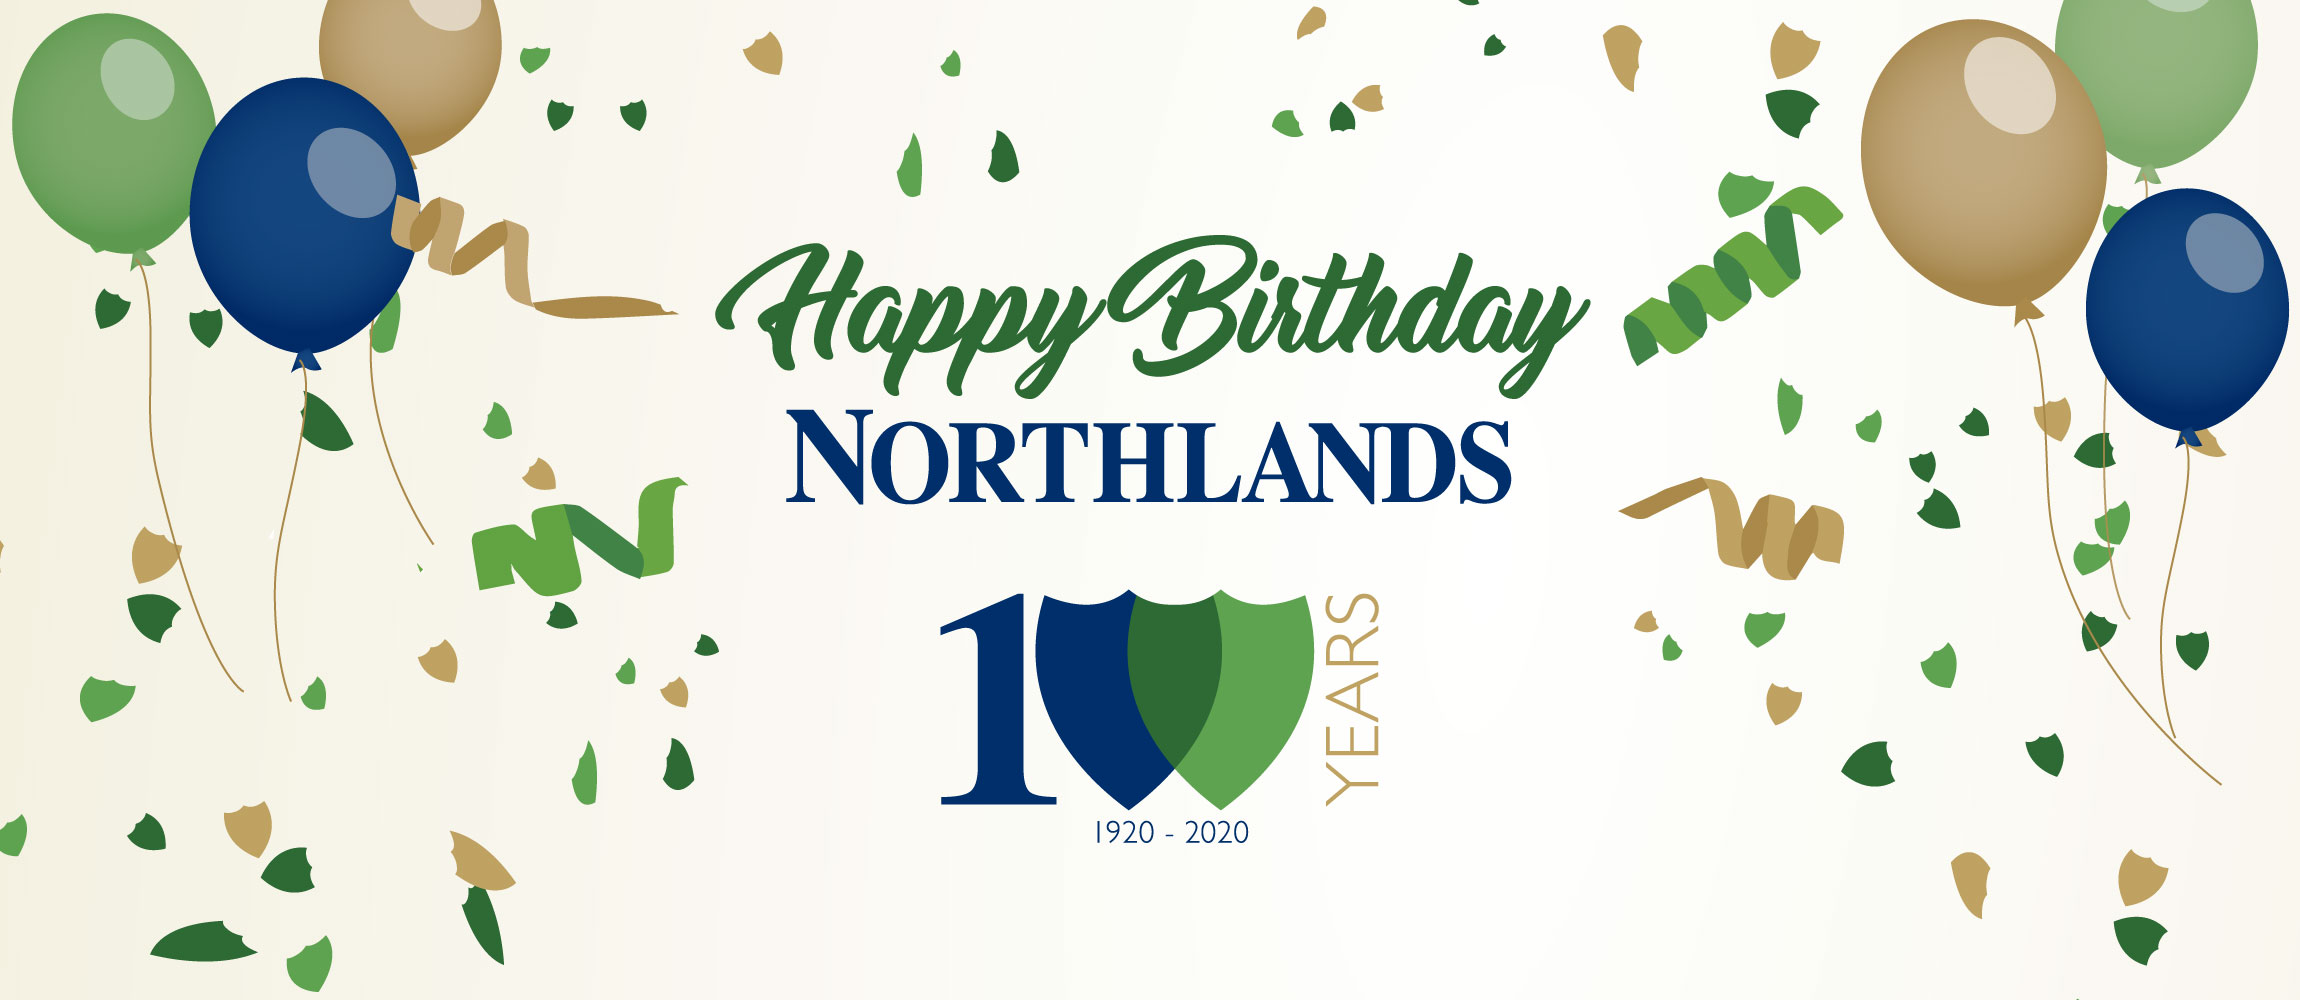 100 Years of Northlands